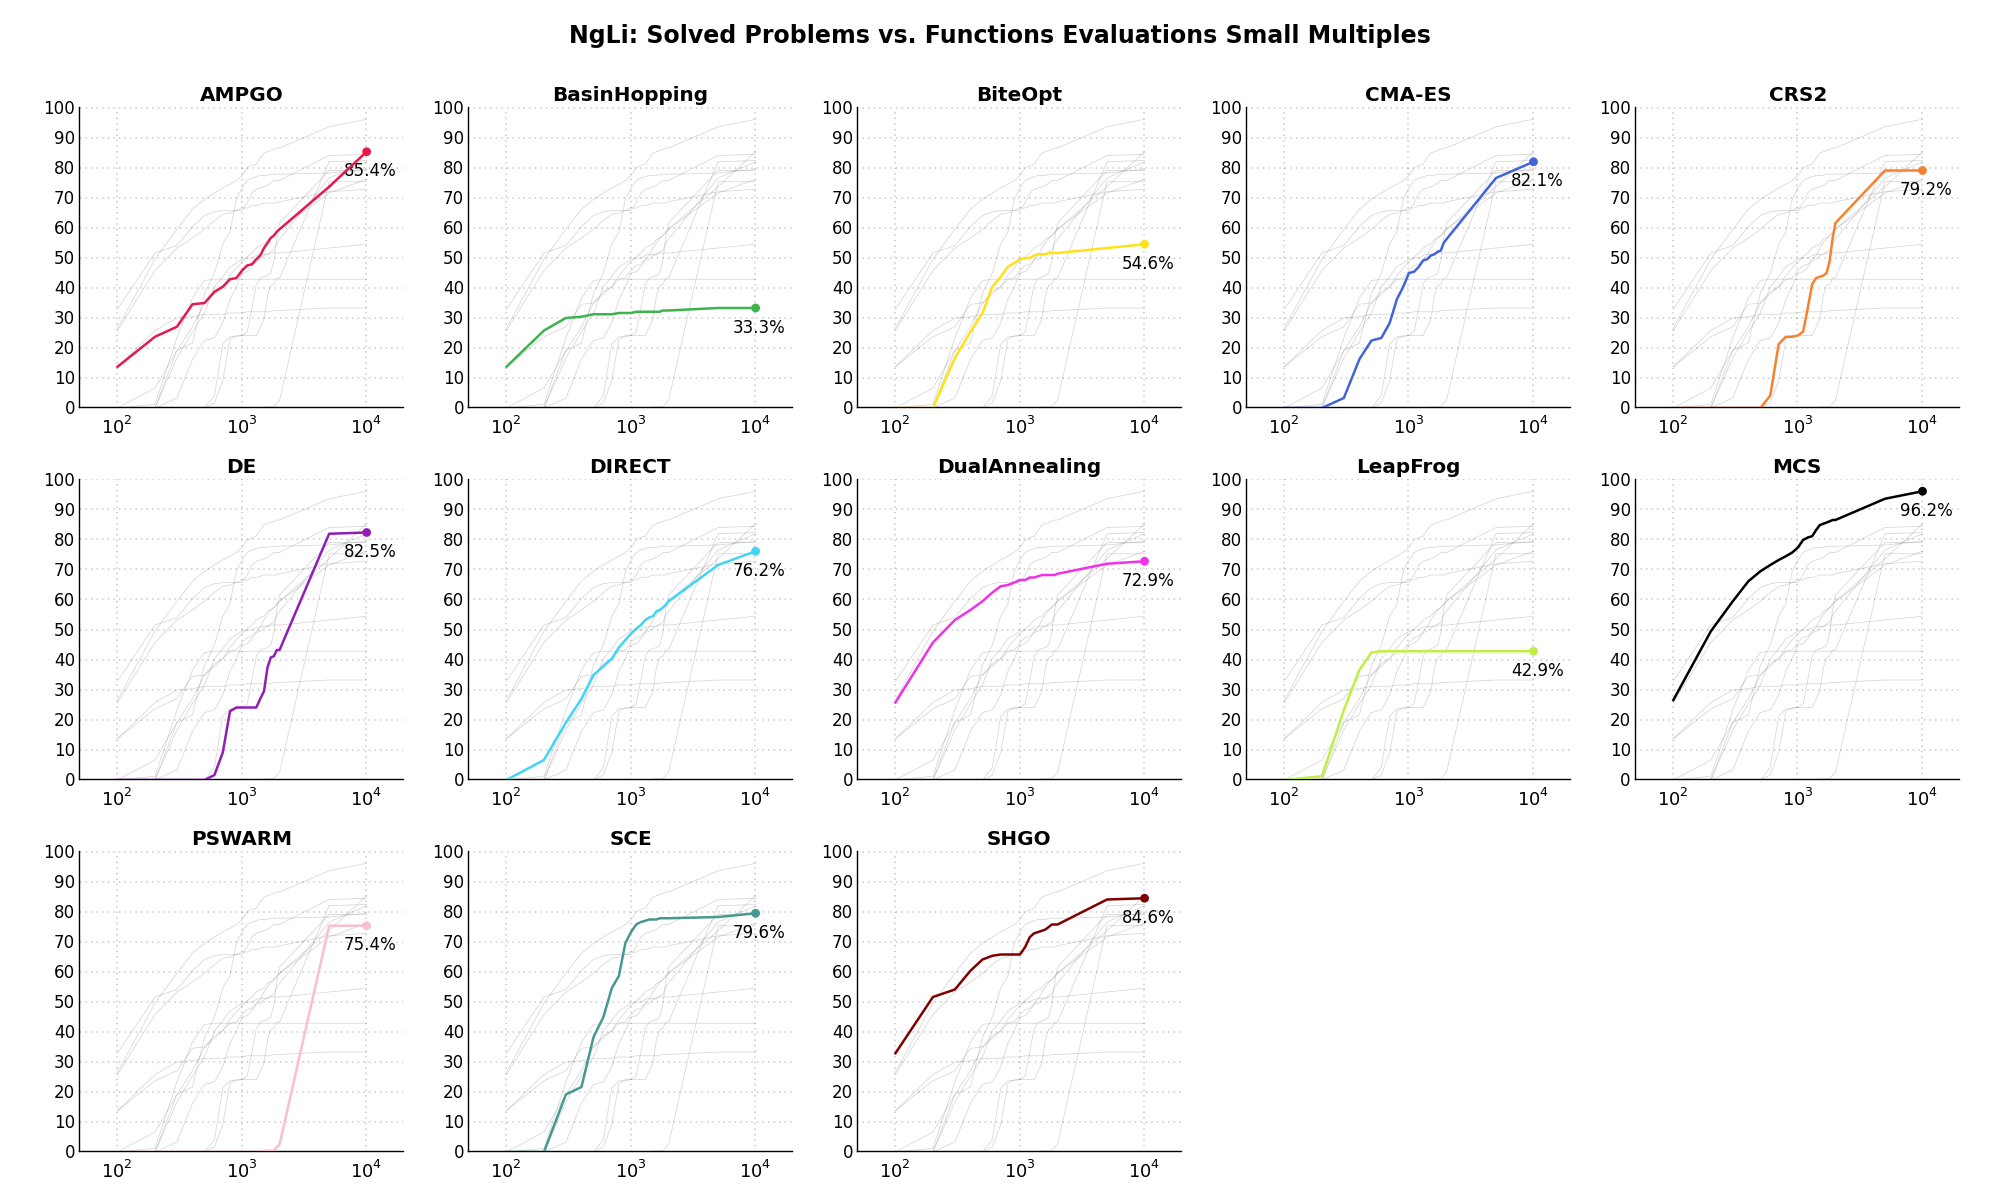 Percentage of problems solved given a fixed number of function evaluations on the NgLi test suite